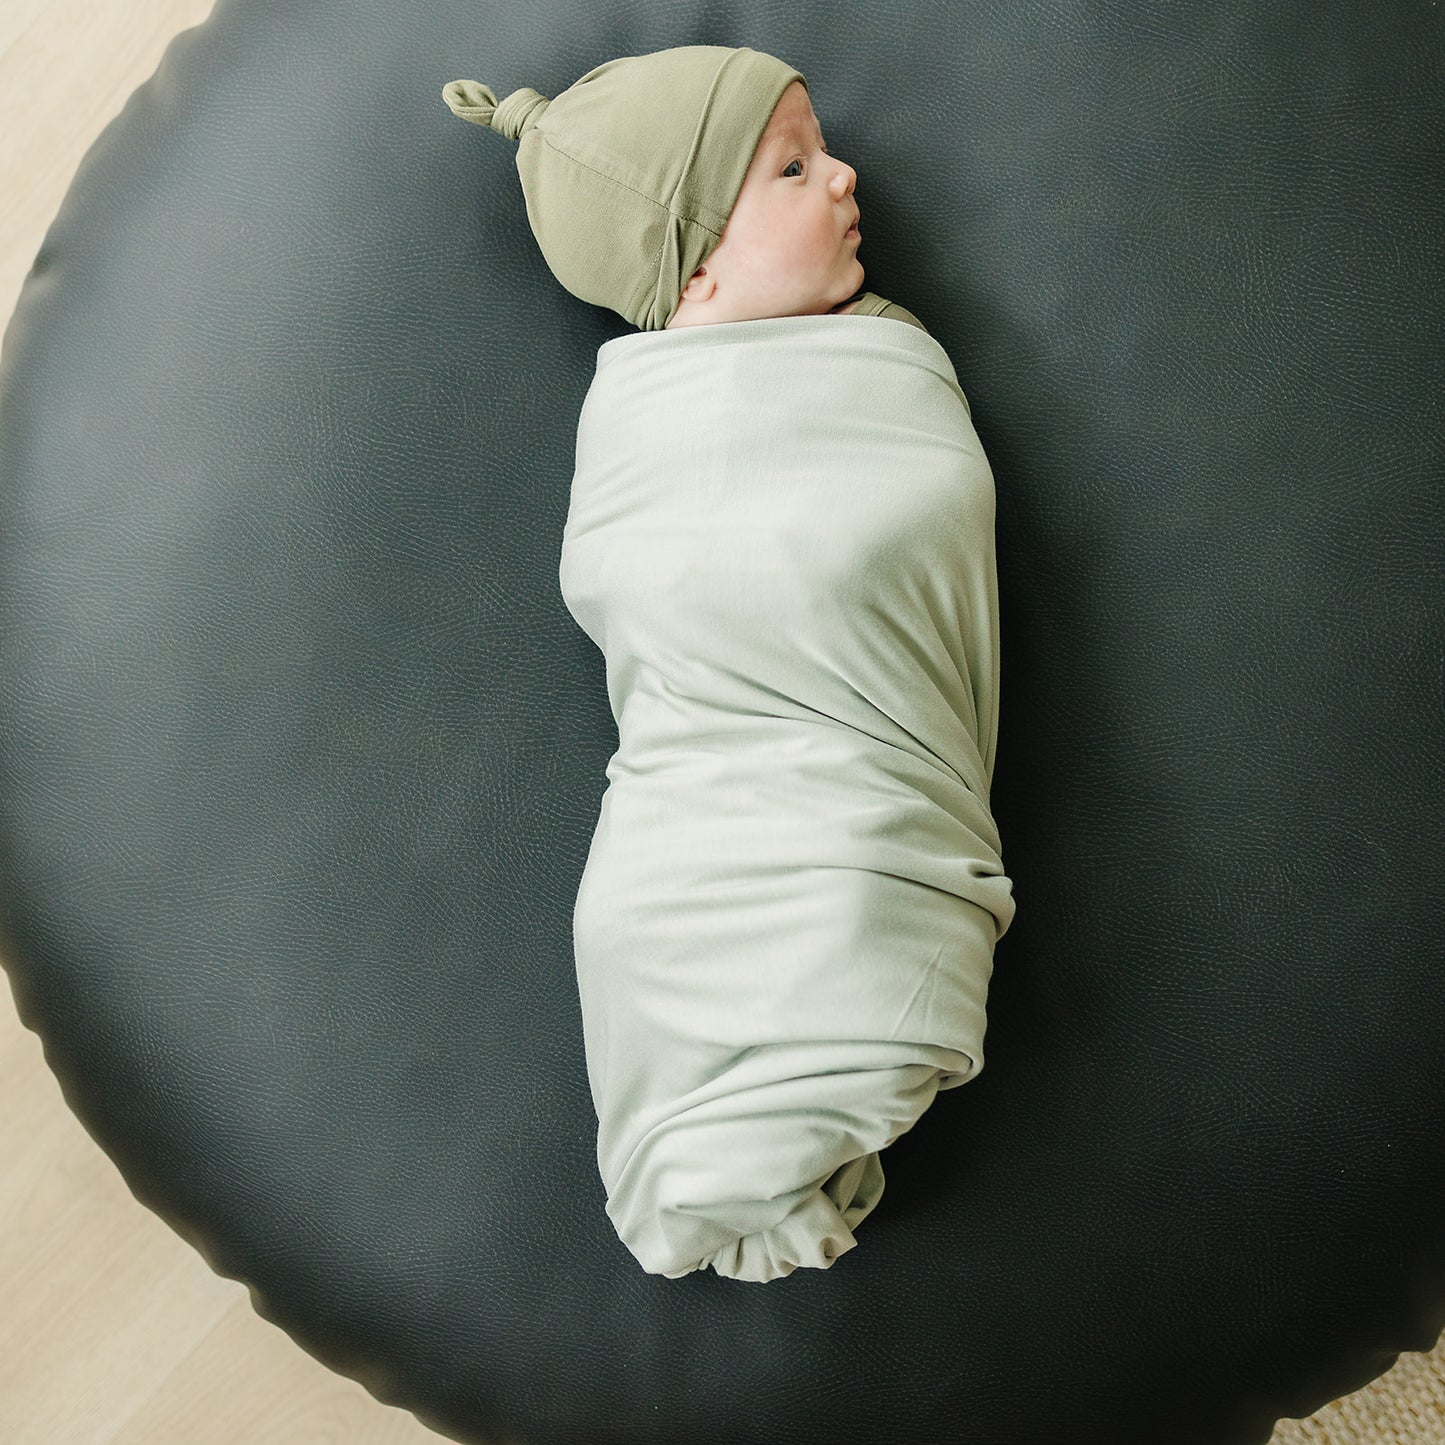 Mebie Baby Bamboo Stretch Swaddle. Gender Neutral for take home outfits and swaddling newborns. 